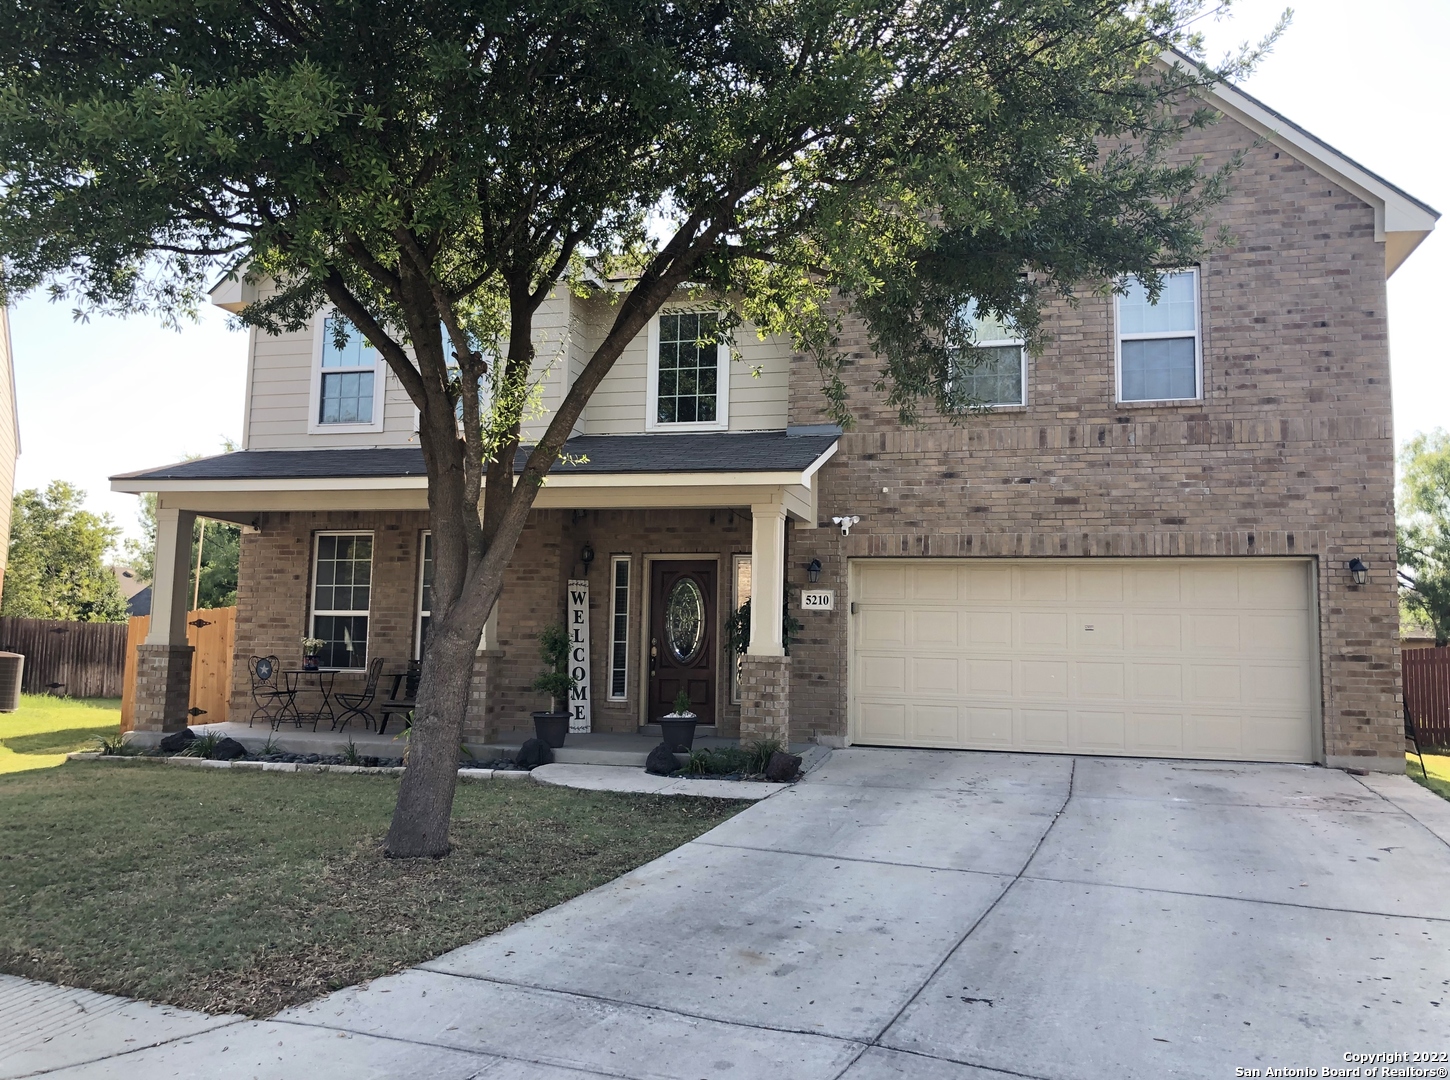 Well maintained home in a great neighborhood on west side of San Antonio, only 3 miles to Sea World, 15 minutes to Six Flags, and easy access to Hwy 151 & Loop 1604. Come see this 5 bedroom, 3 bath, 2 story home with a backyard shangri-la complete with swimming pool, hot tub, and outdoor kitchen, privacy fence and utility shed. Quiet living on a cul de sac, this home has natural gas and electric energy source with two new hot water heaters. Pool/ping pong/air hockey table conveys with home. Refrigerator, washer, and dryer does not convey.